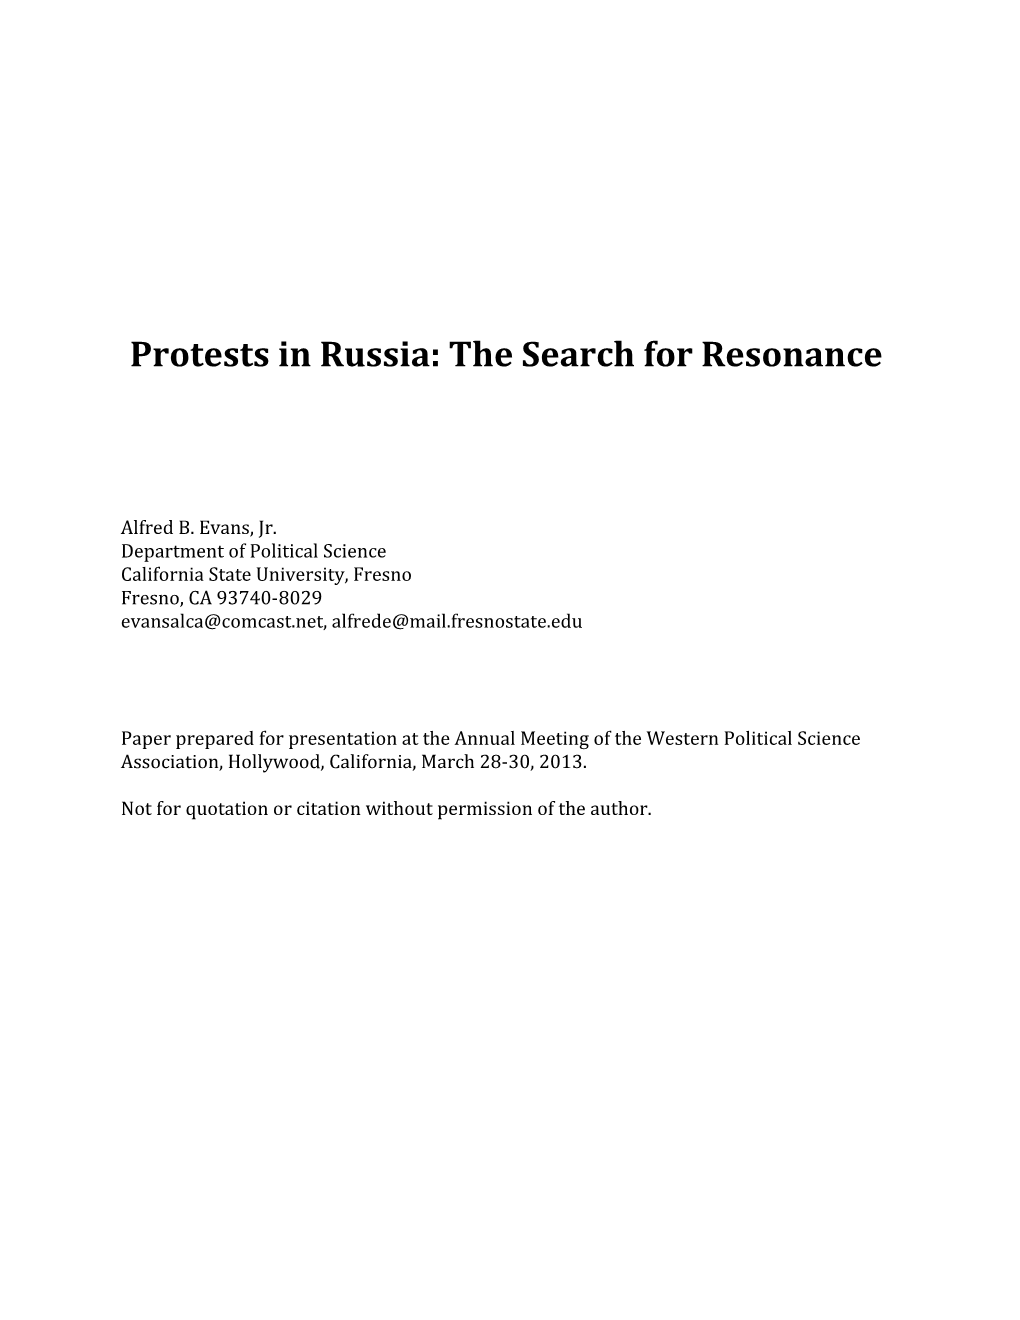 Protests in Russia: the Search for Resonance